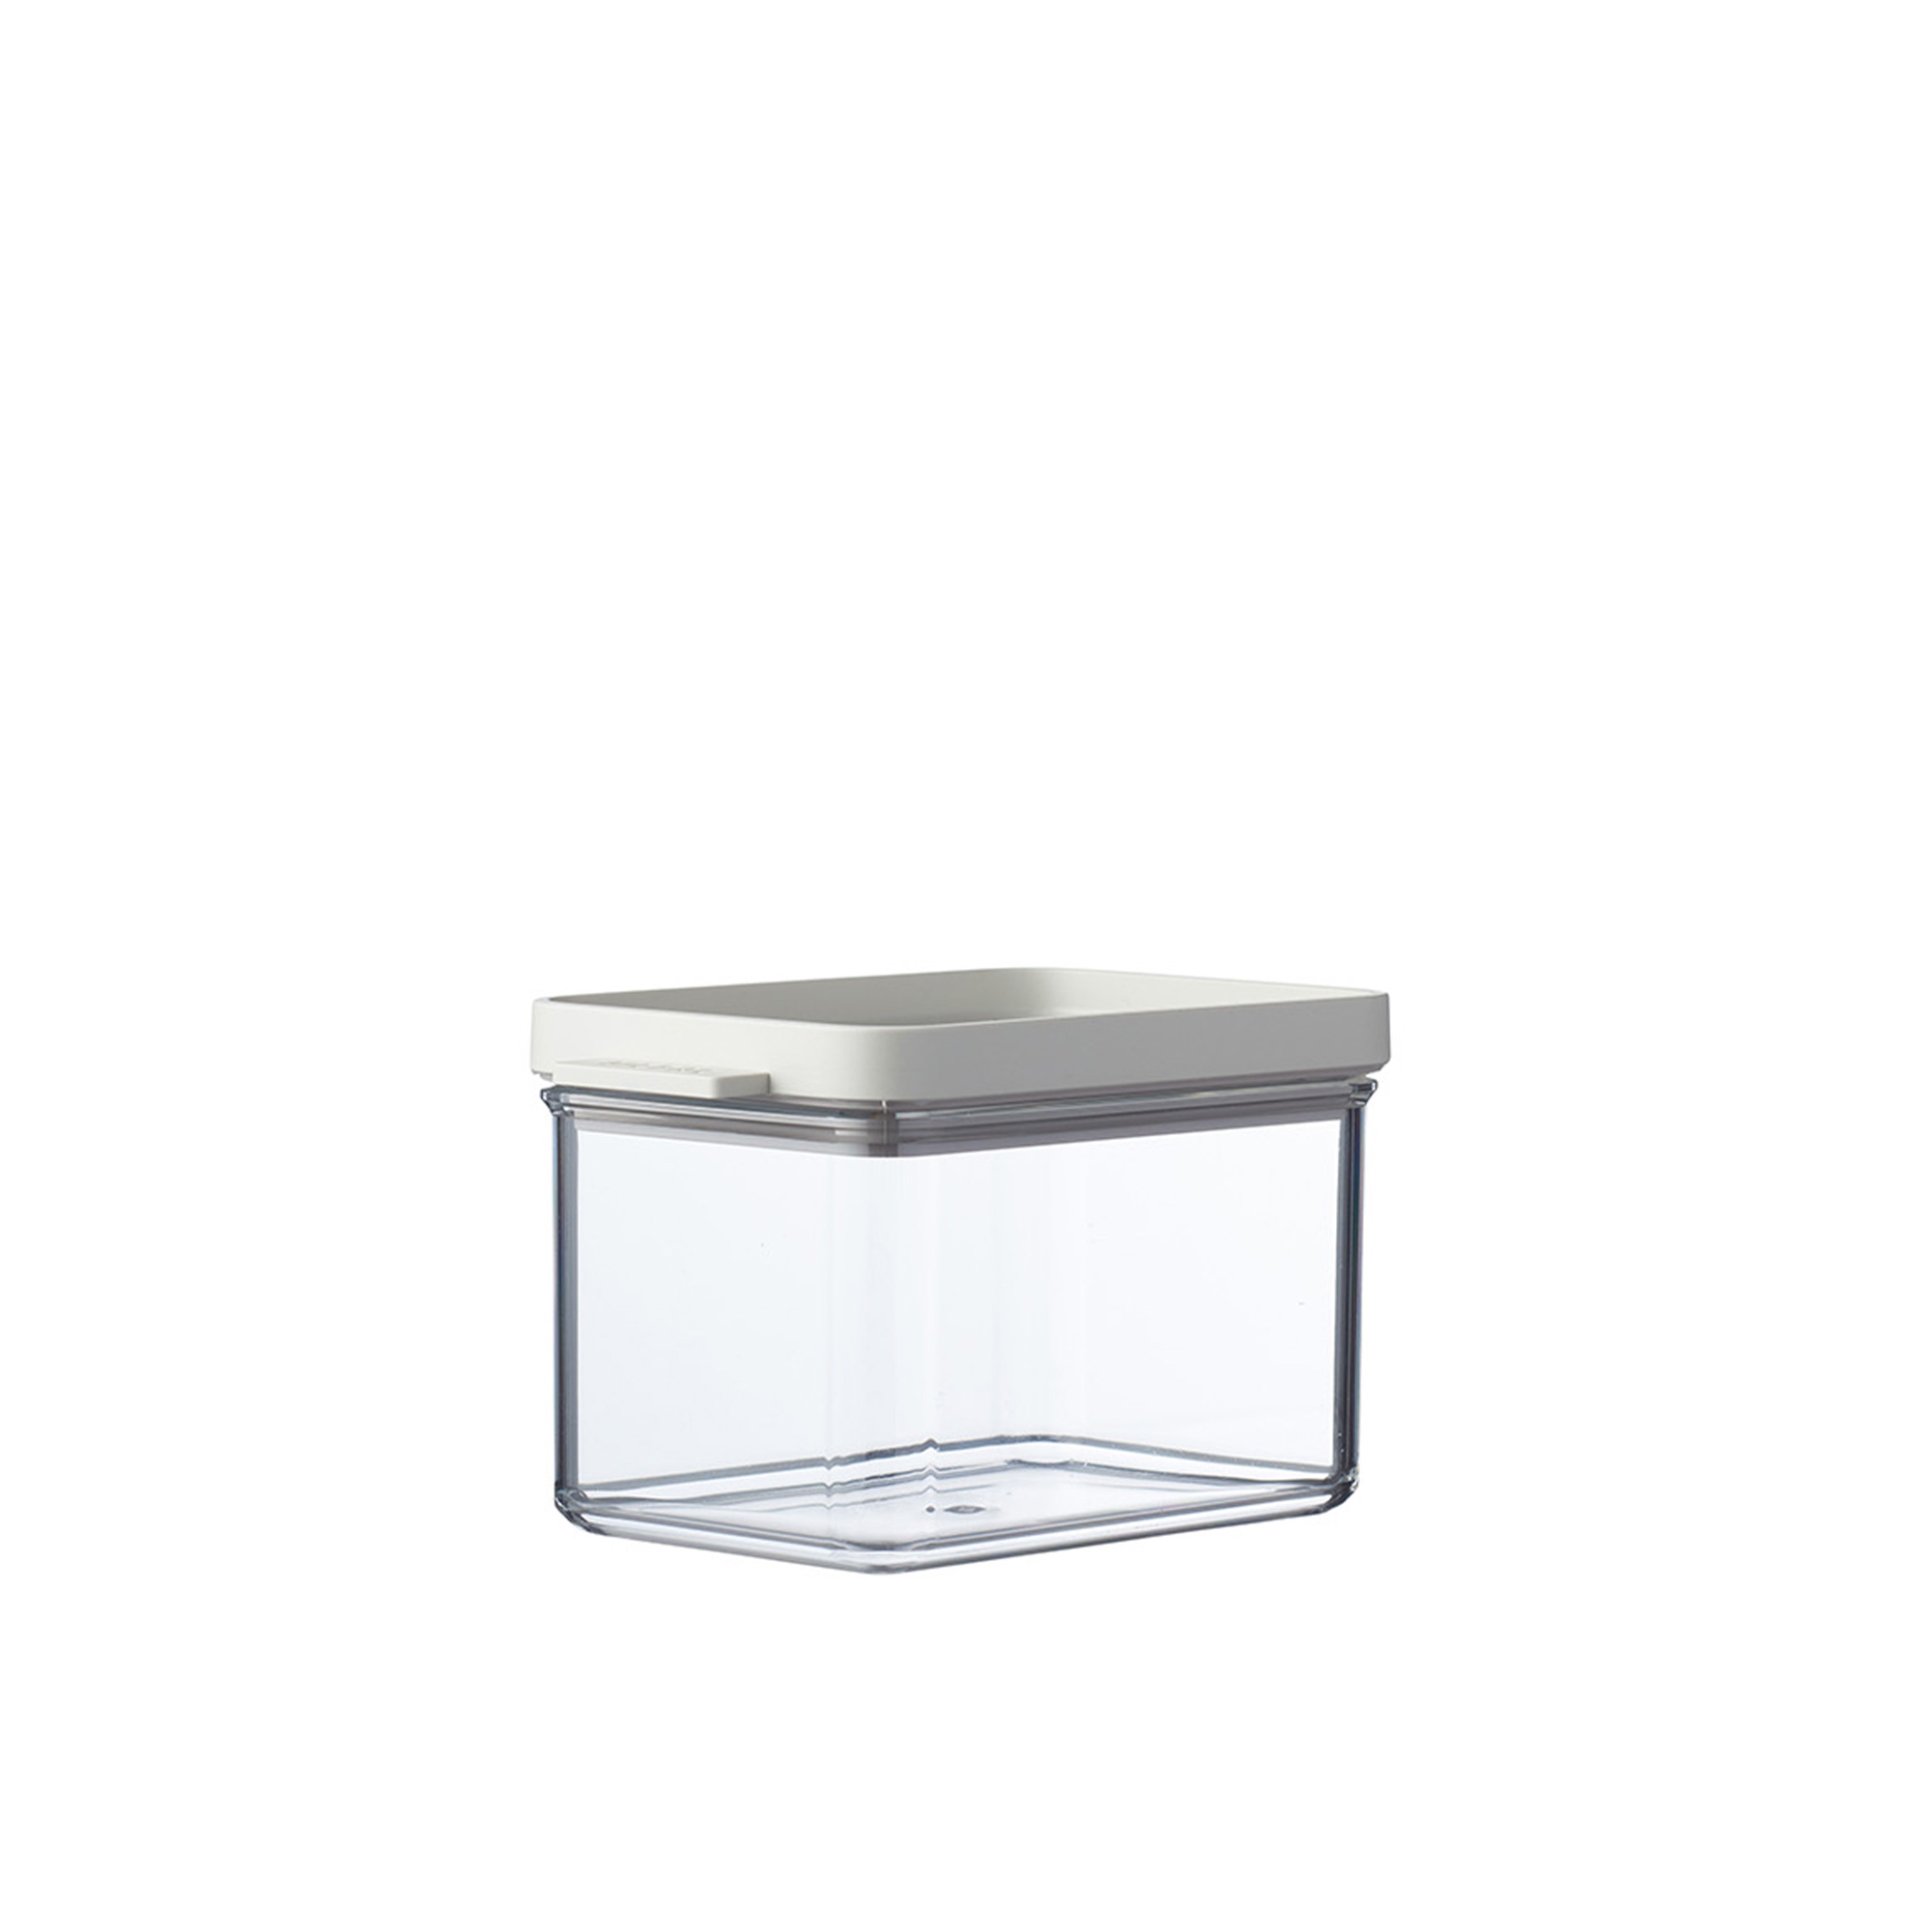 Mepal - Omnia storage containers - different sizes and colors